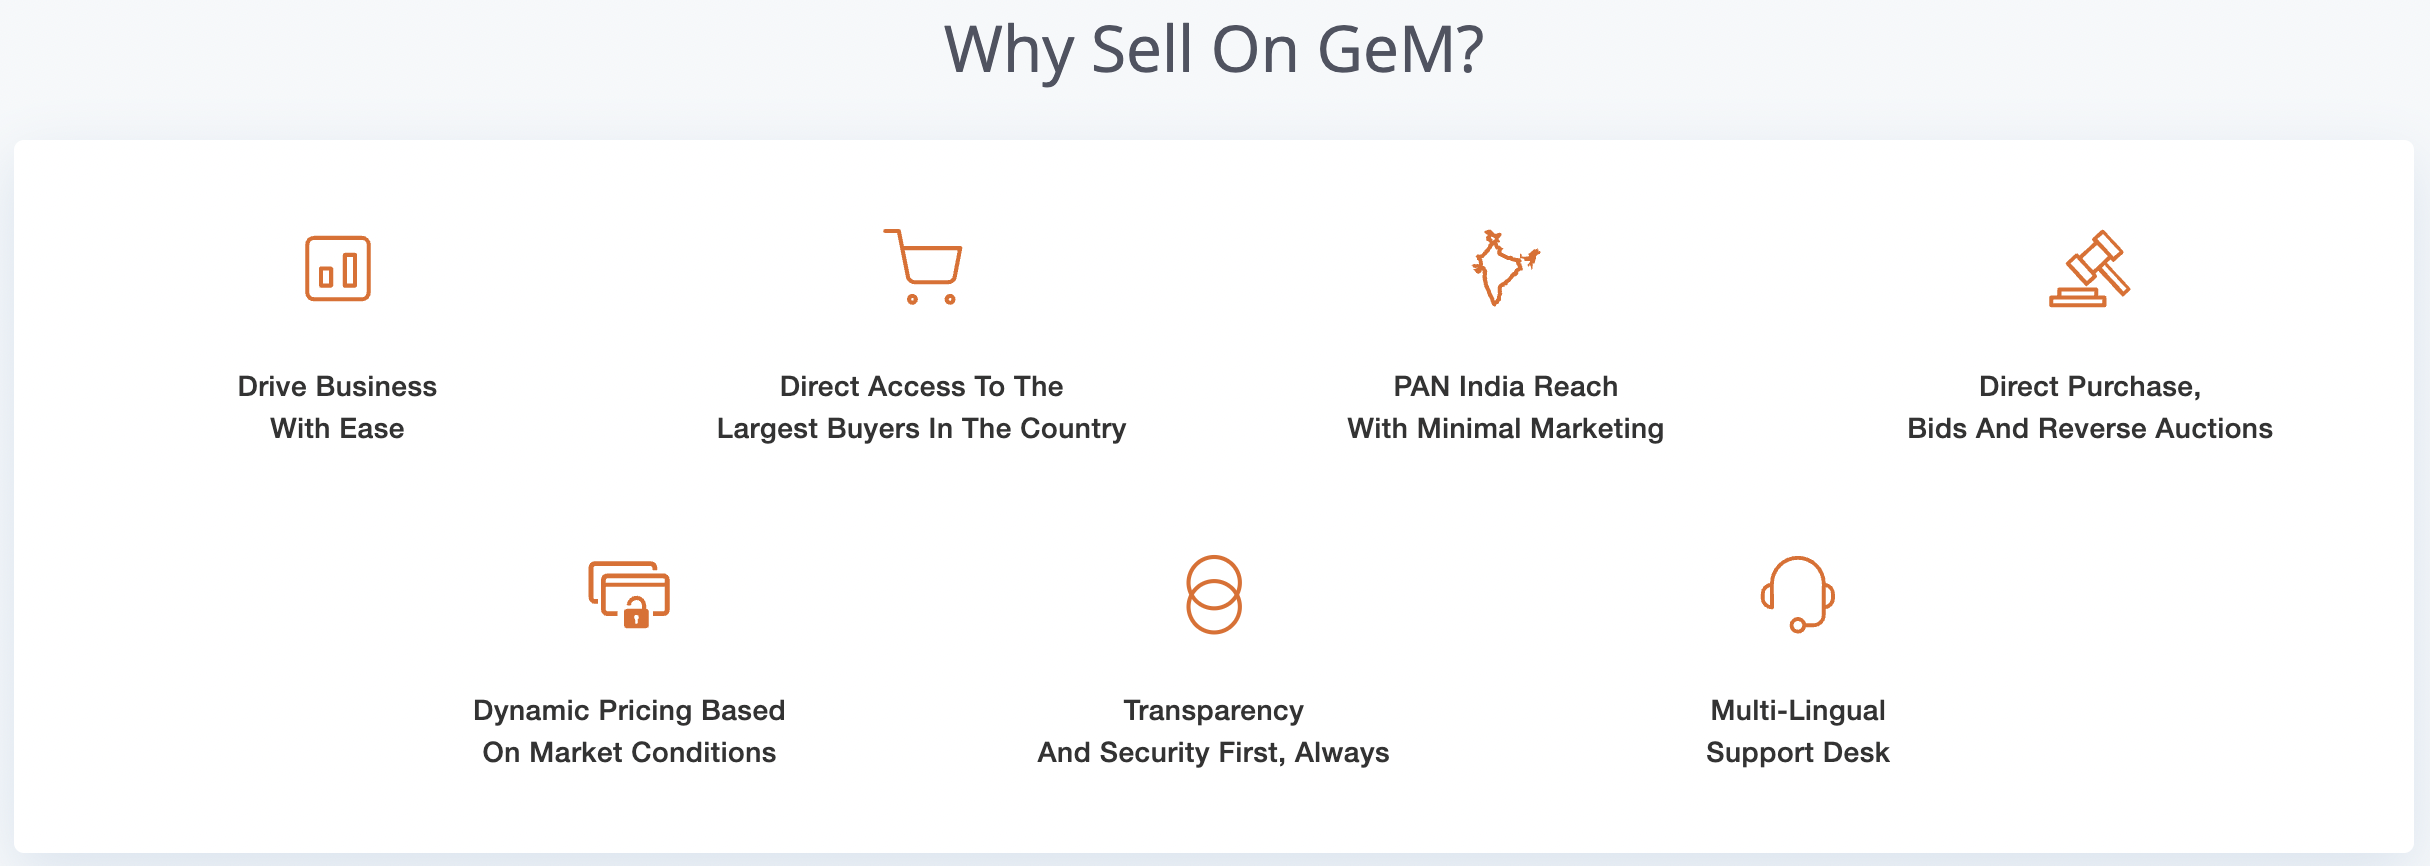 Appeal to all cooperatives to register as "Seller" on GeM portal